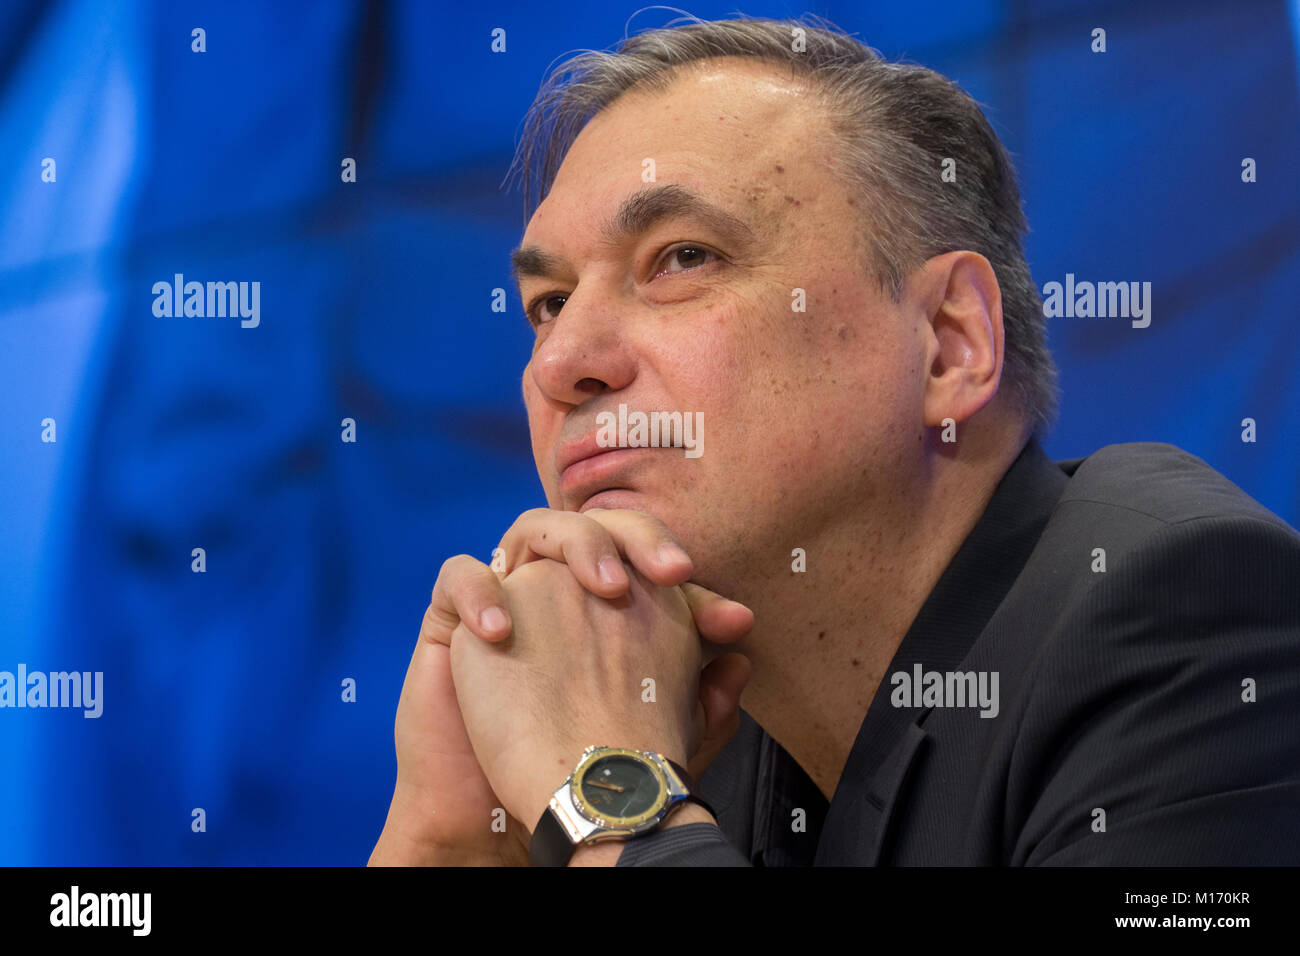 Moscow, Russia. 25th January, 2018. Producer Dmitry Rudovsky at a news conference ahead of the press-preview of the Selfie film at the Rossiya Segodnya news agency's international multimedia press center.  Credit: Victor Vytolskiy/Alamy Live News Stock Photo